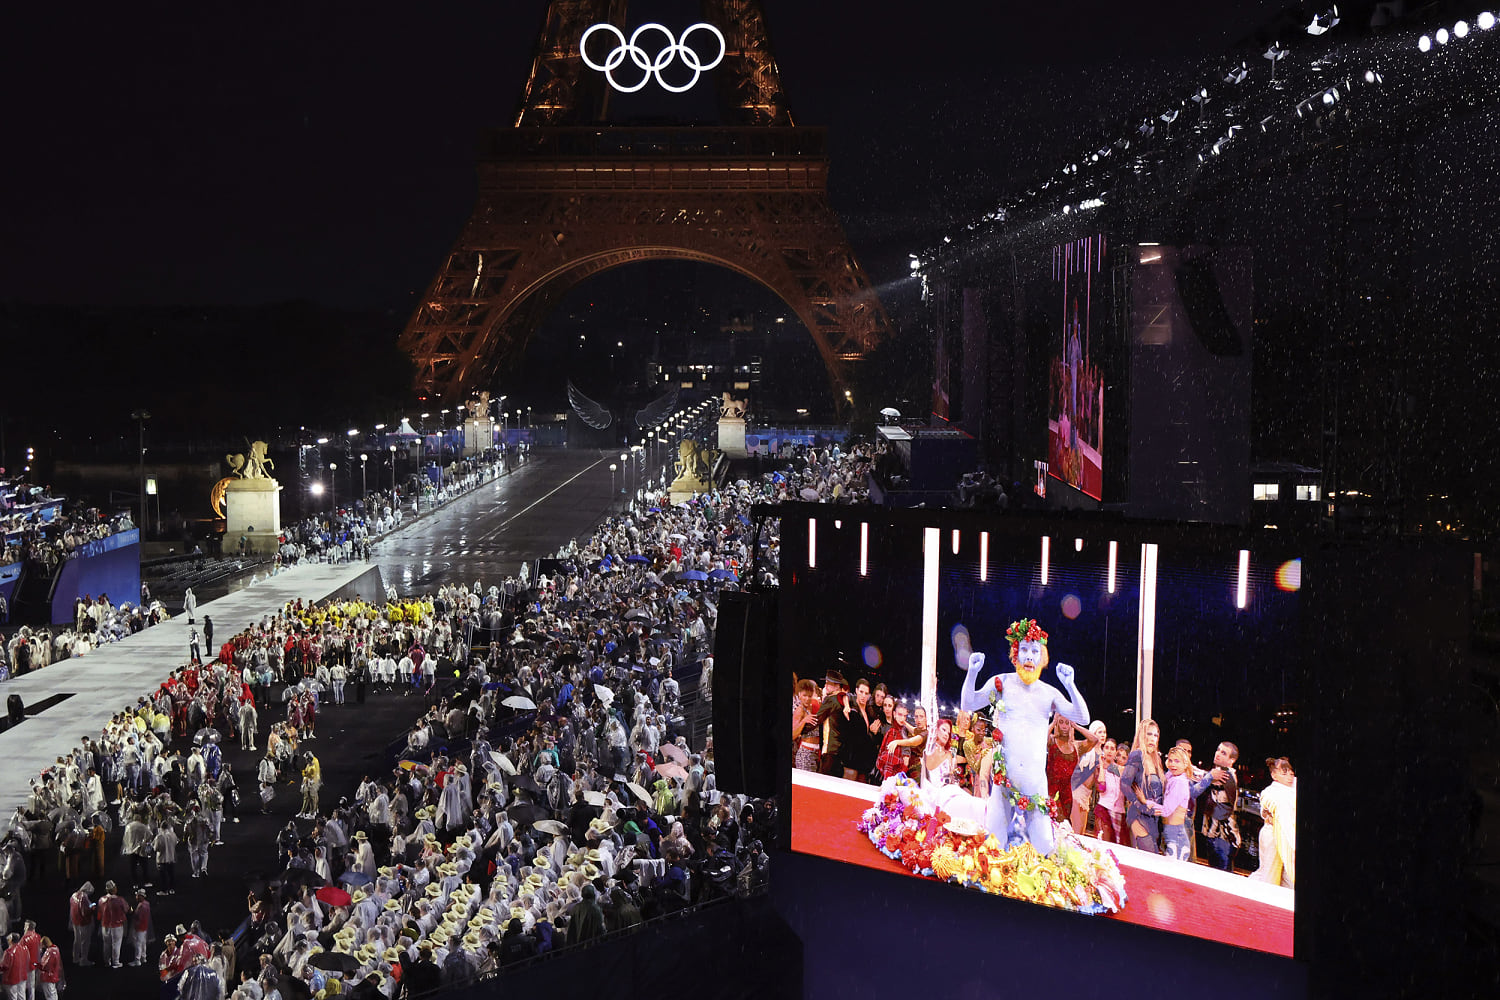 French entertainer who performed as a mostly nude Greek god during opening ceremony responds to controversy 